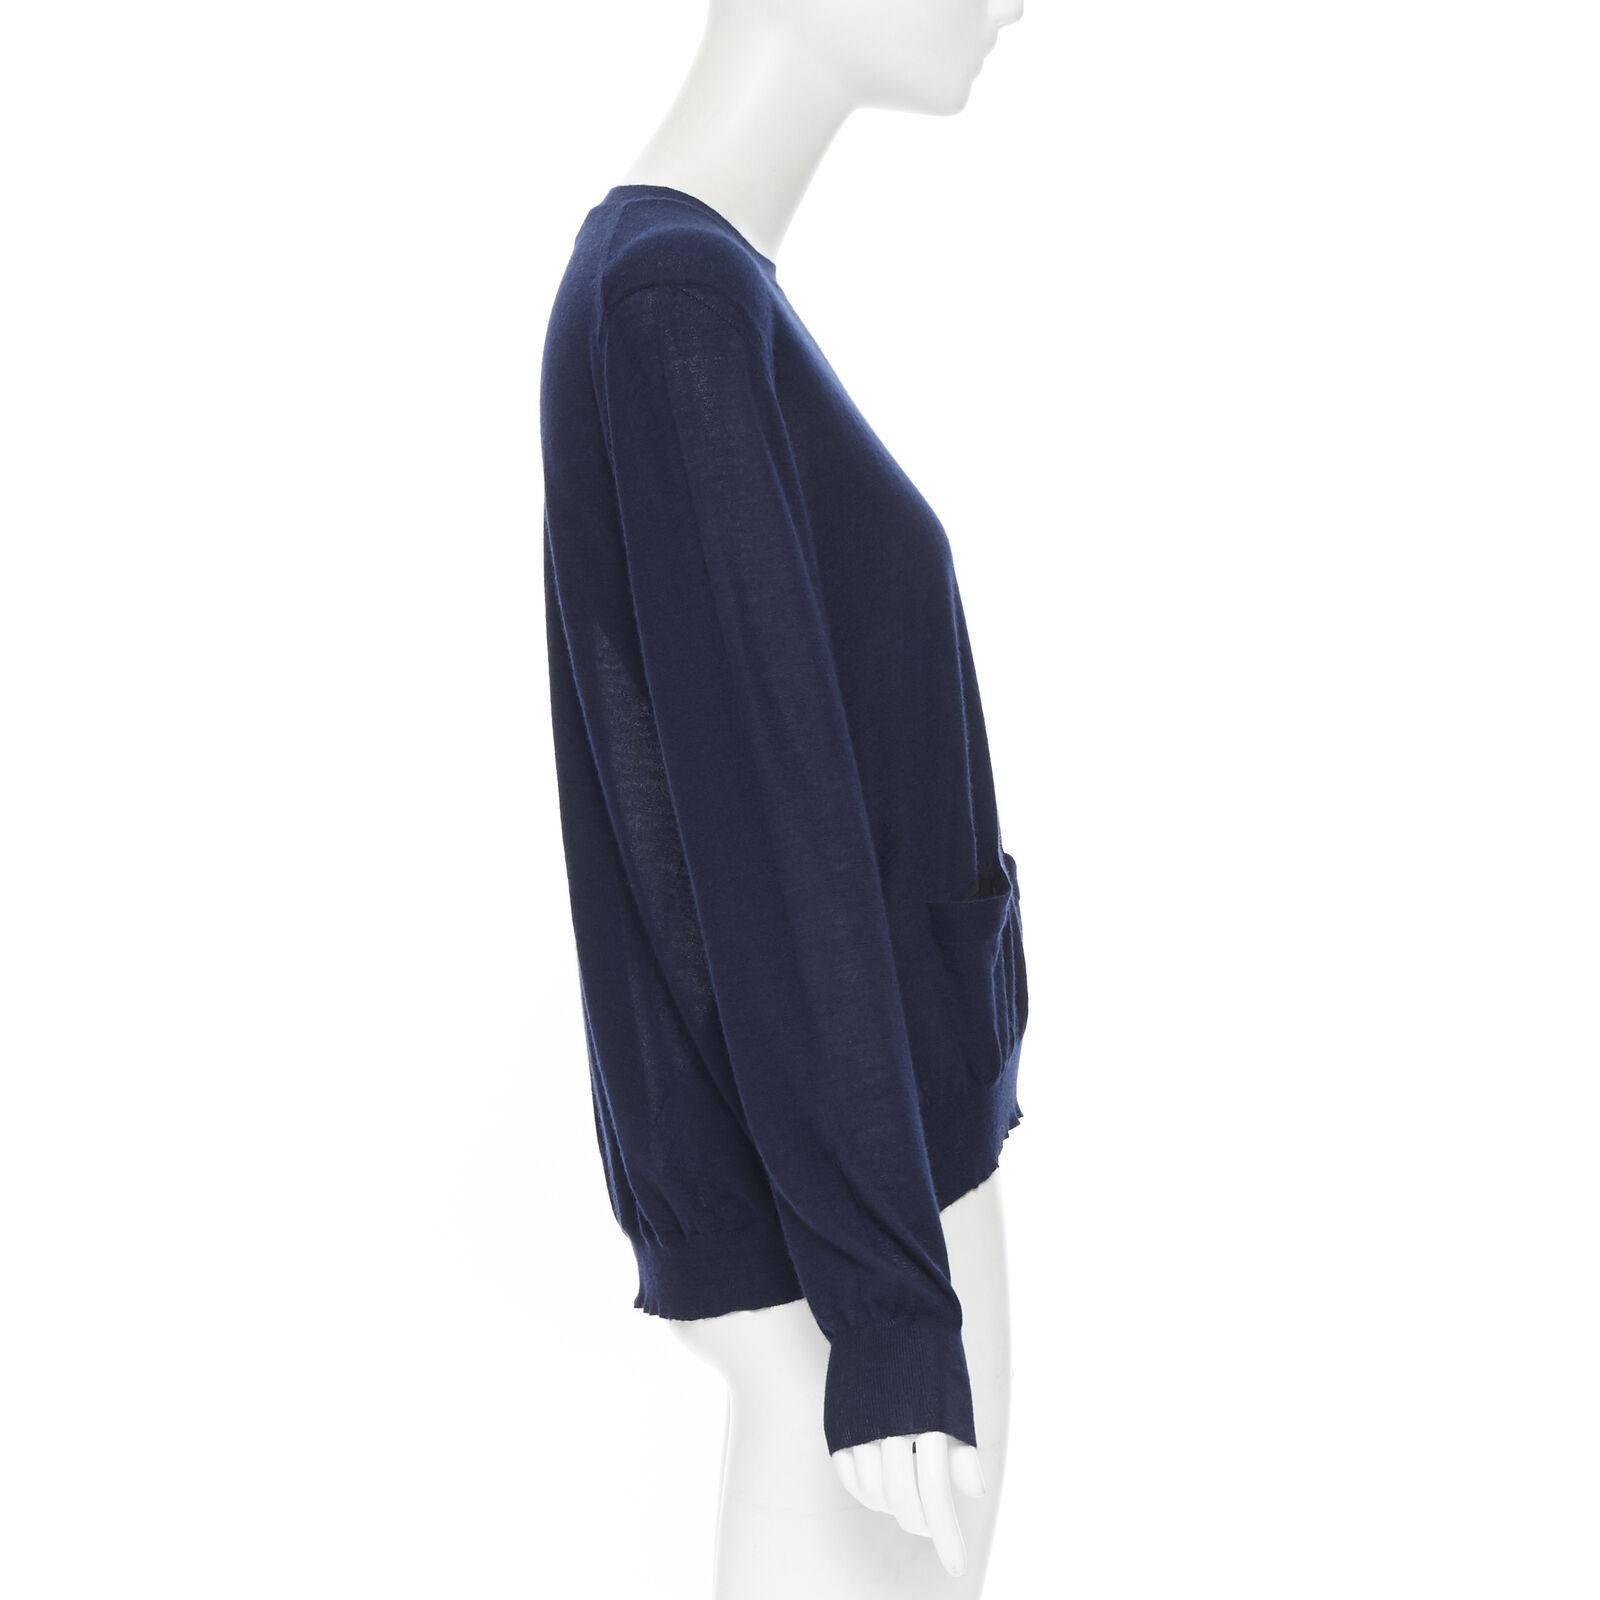 Women's MARNI navy blue cashmere dual front slit pocket long sleeve sweater IT40 S